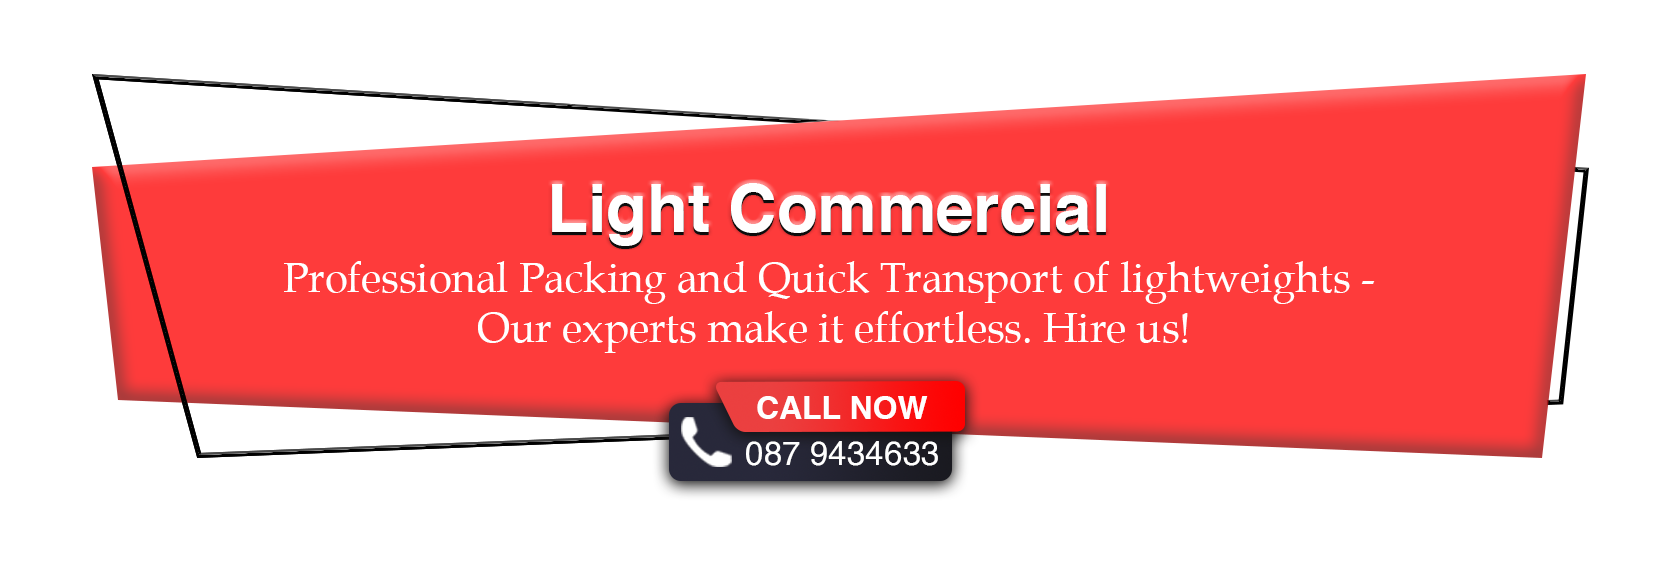 Light Commercial Removal